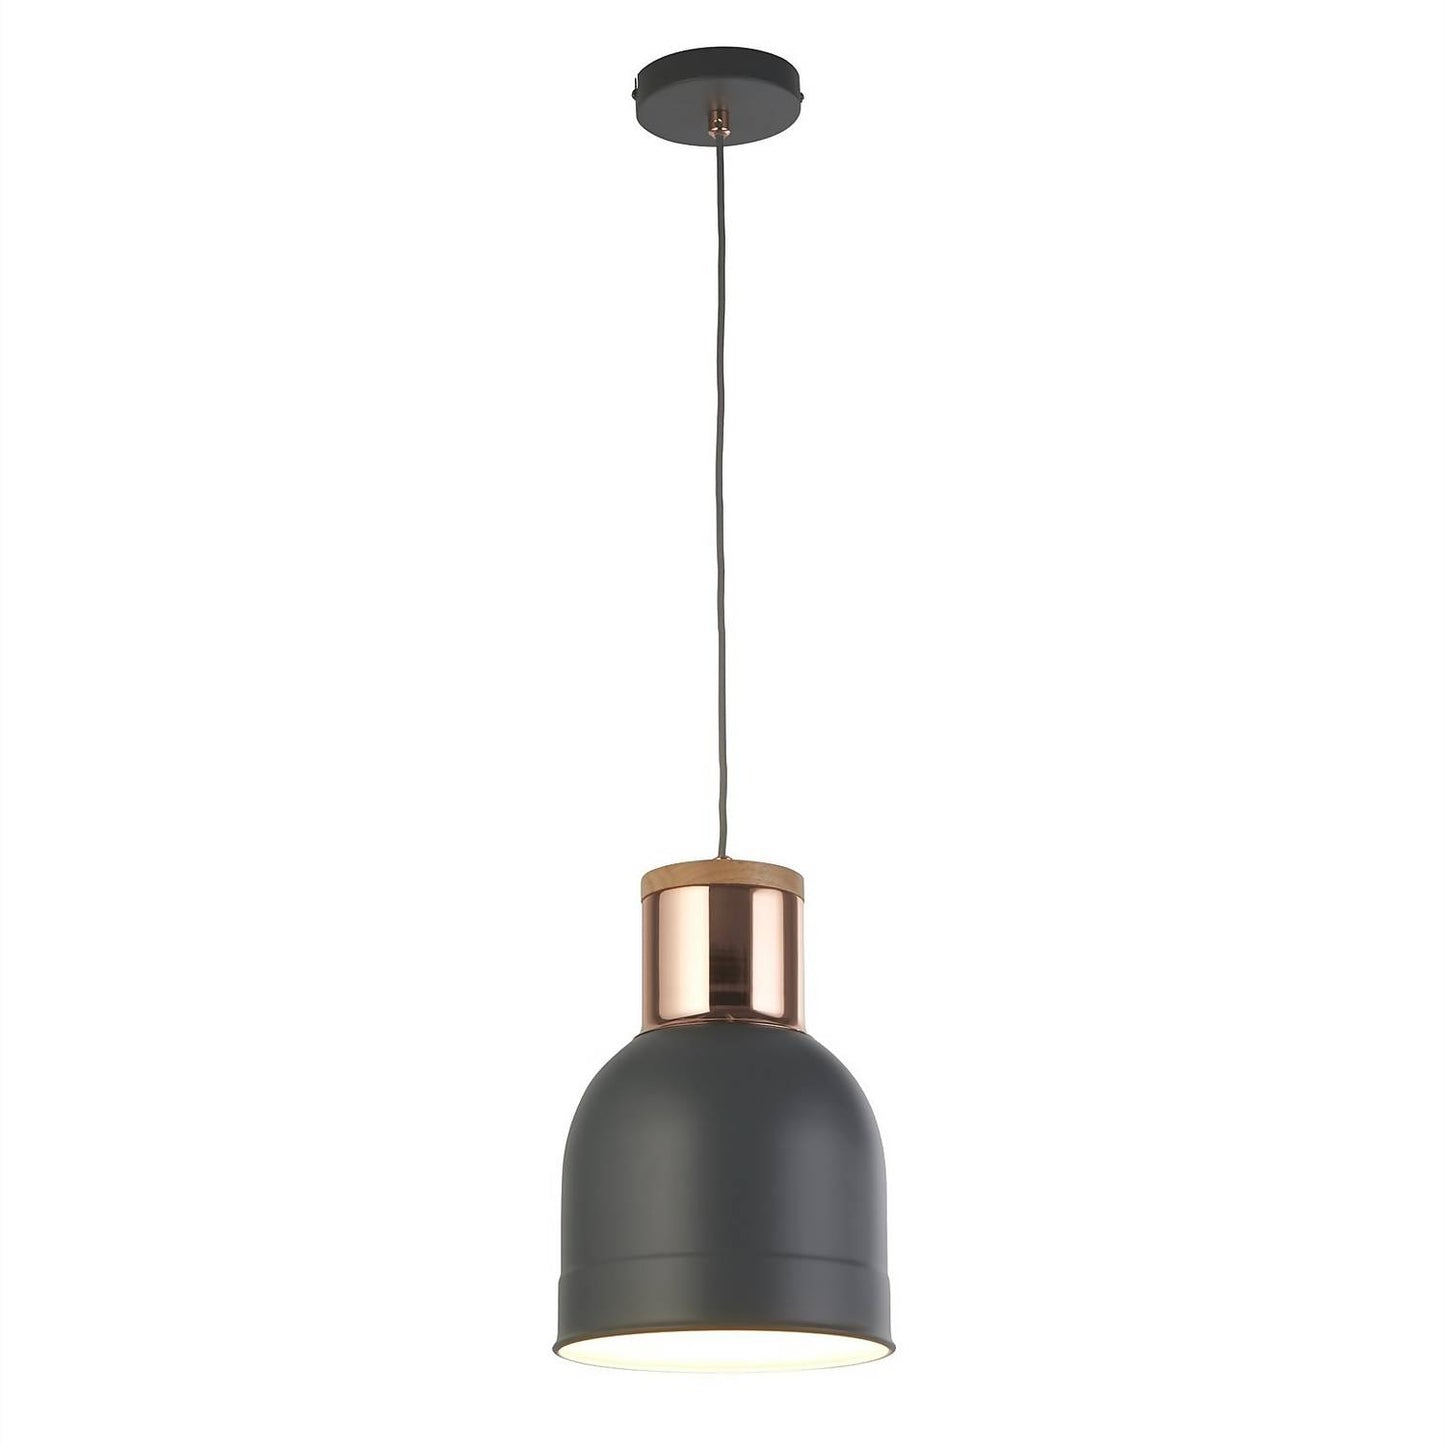 CGC SHELL Grey and Copper Pendant Ceiling Light Adjustable Height